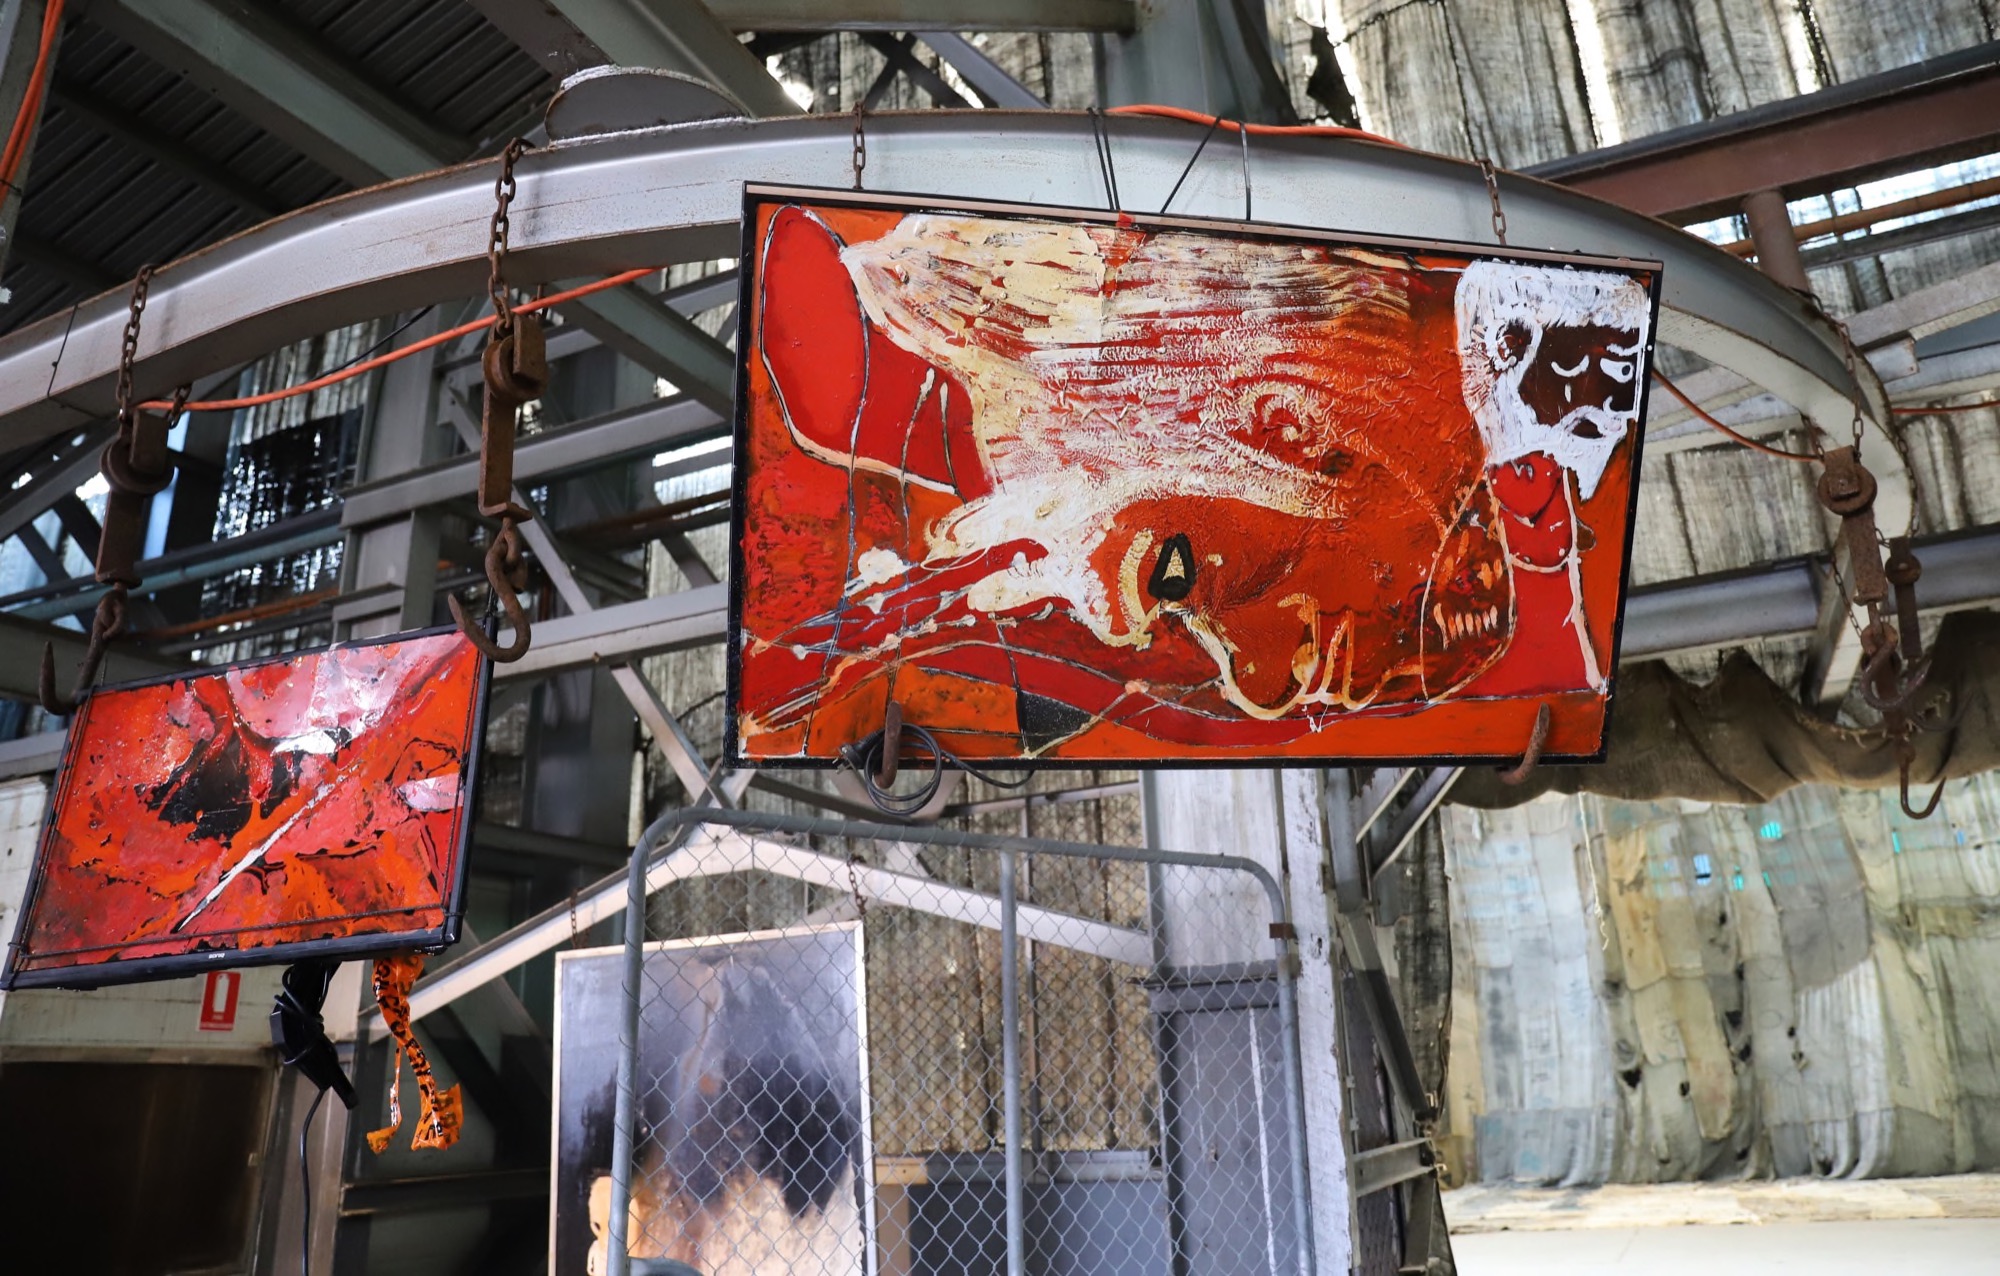 Fabian Brown and Rupert Betheras, <em>The Witness</em>, oil and enamel on repurposed TV screen, Cockatoo Island. Photograph: Lévi McLean.